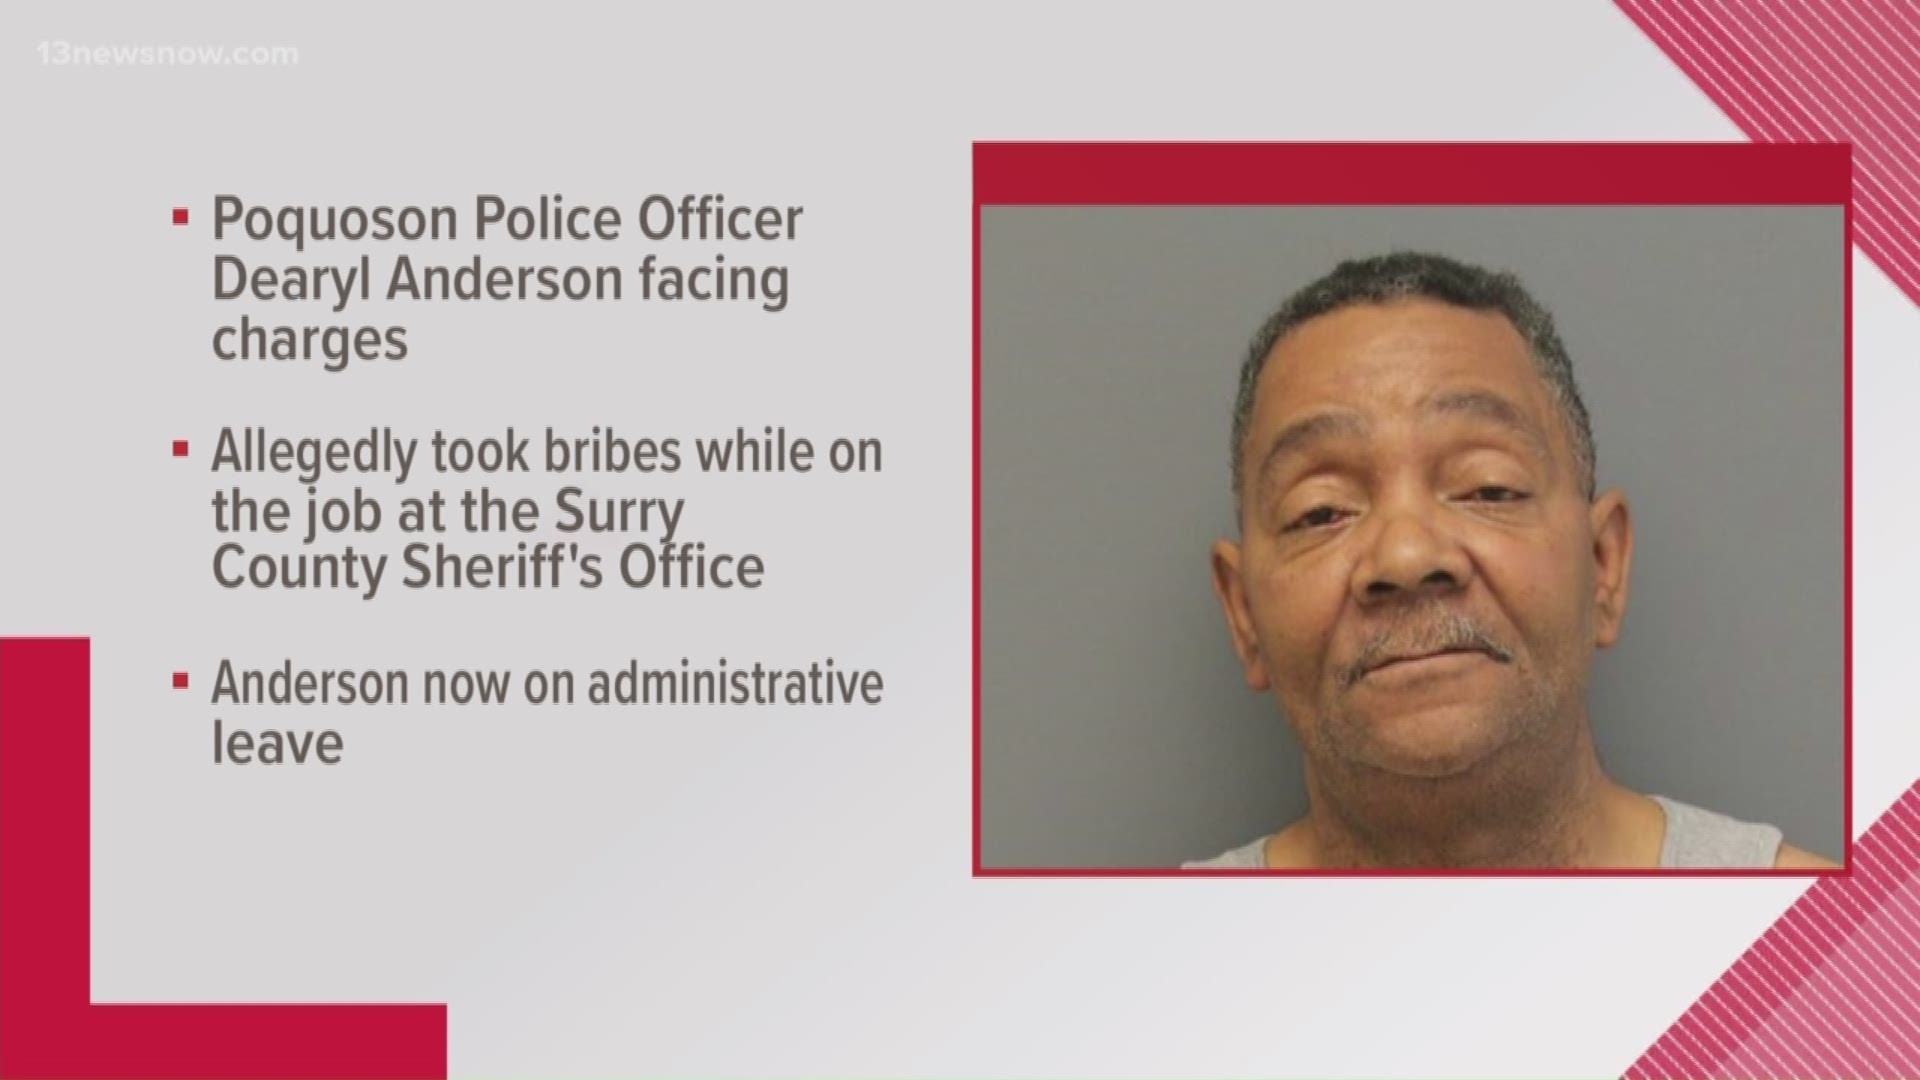 Poquoson Police Chief Clifford Bowen said the charges stem from when the officer worked for the Surry County Sheriff's Office several years ago.